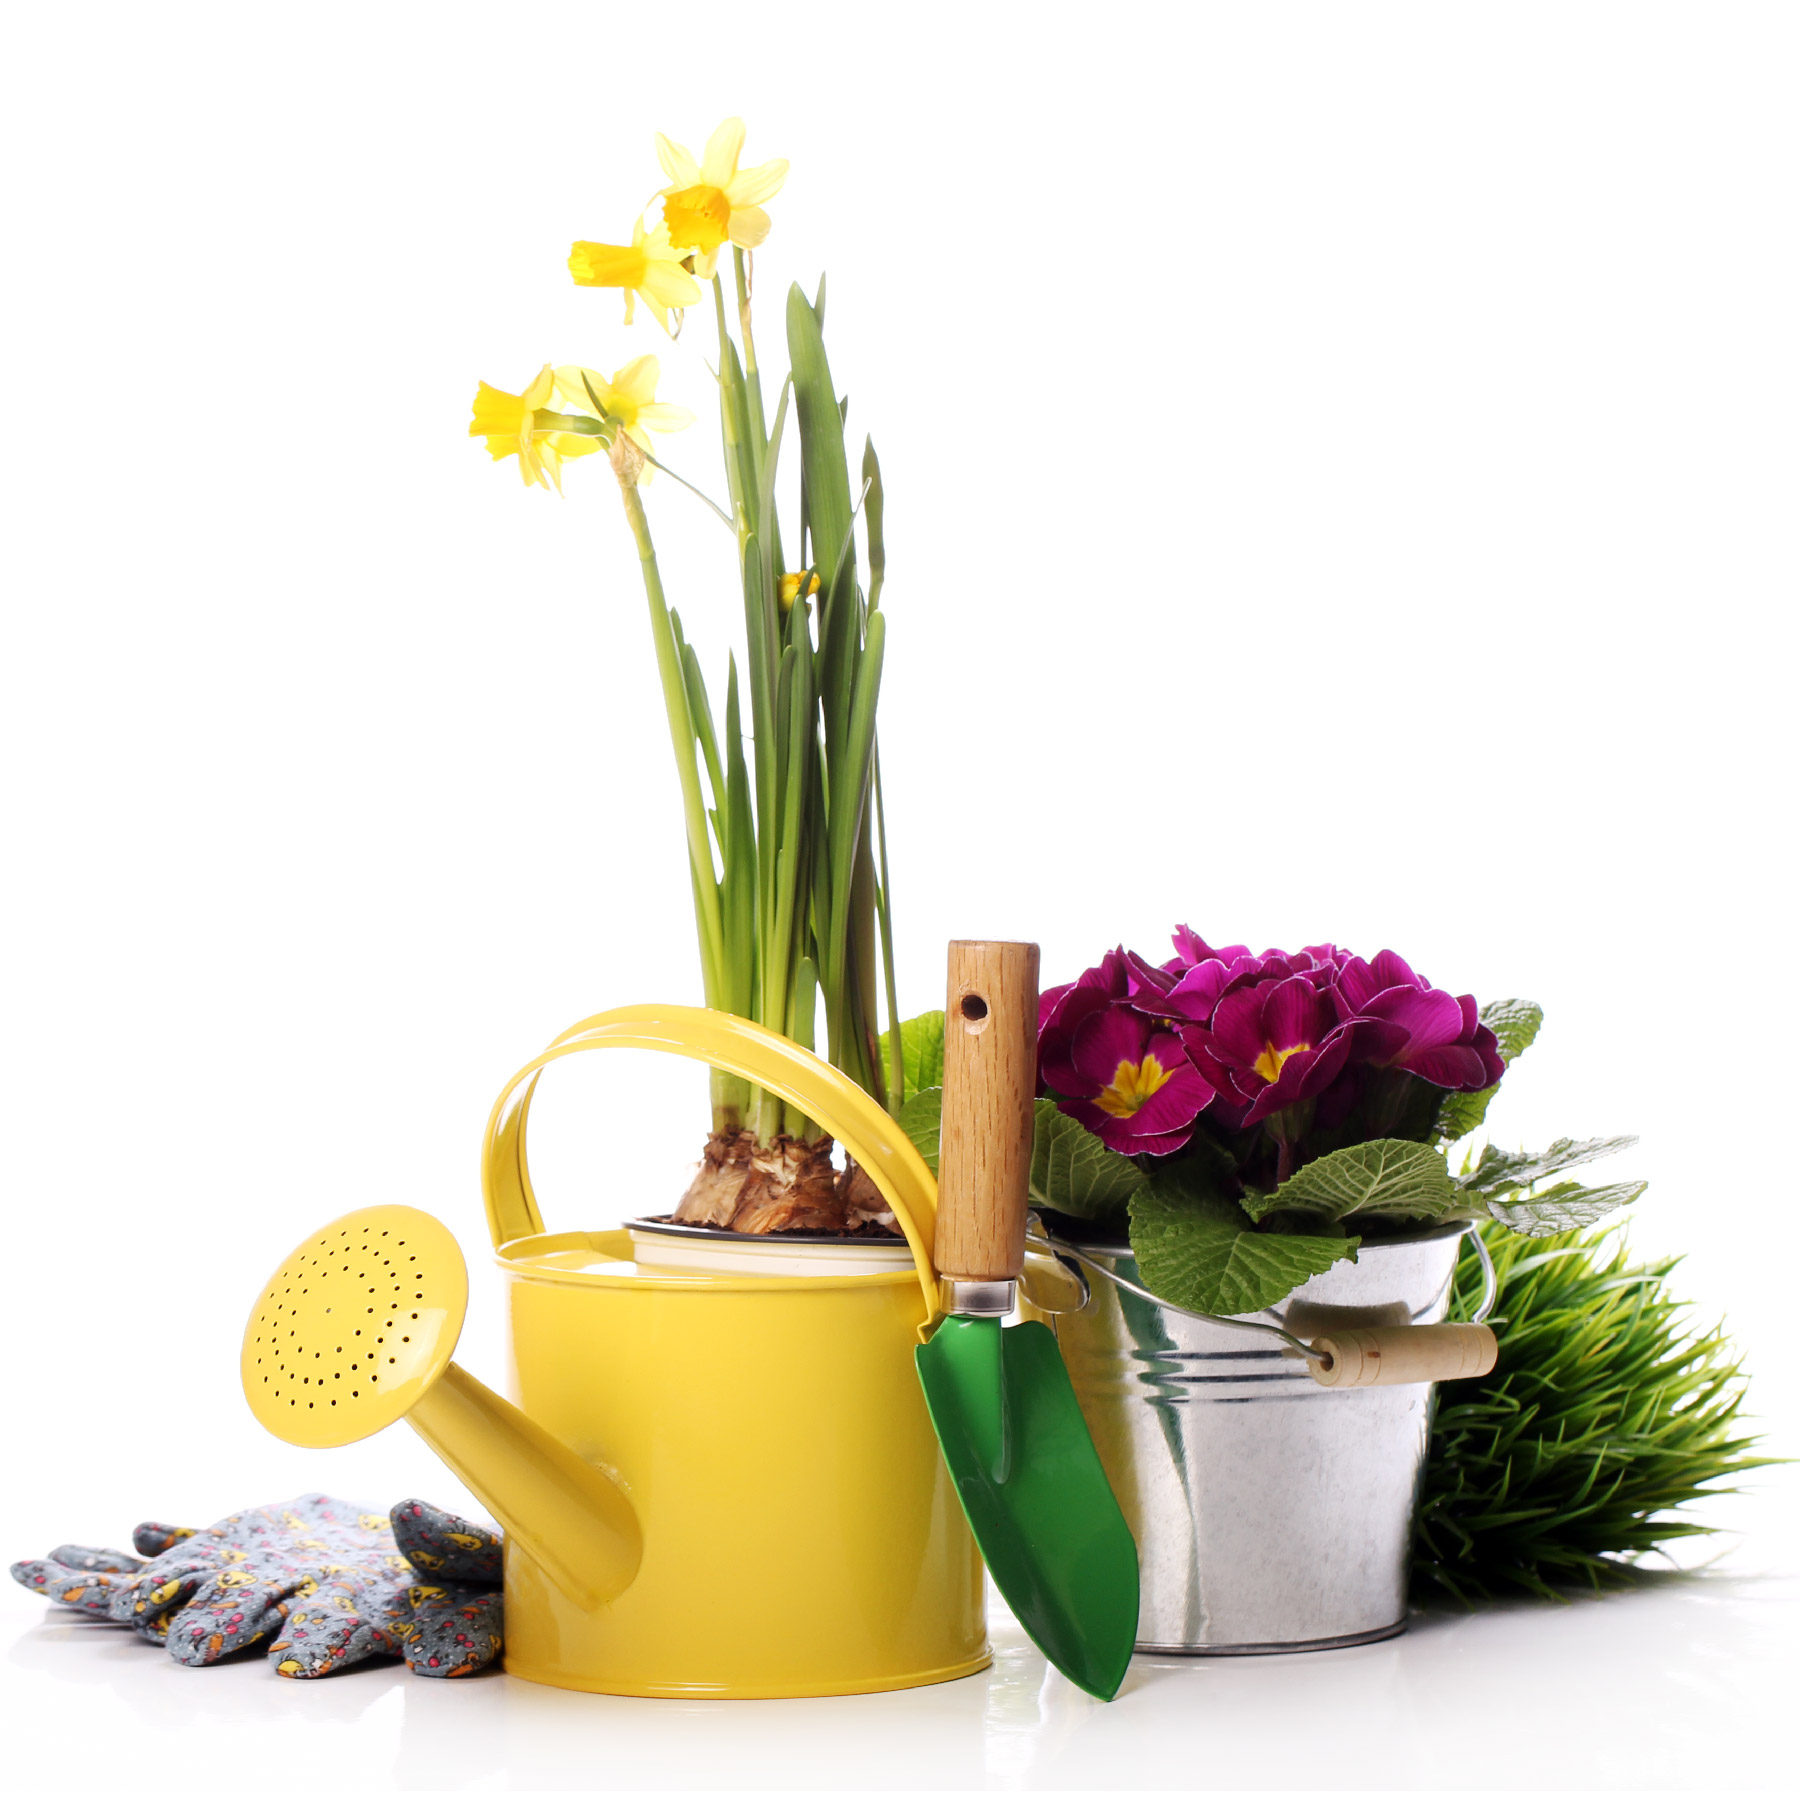 Watering can, flowers, gardening gloves, and shovel